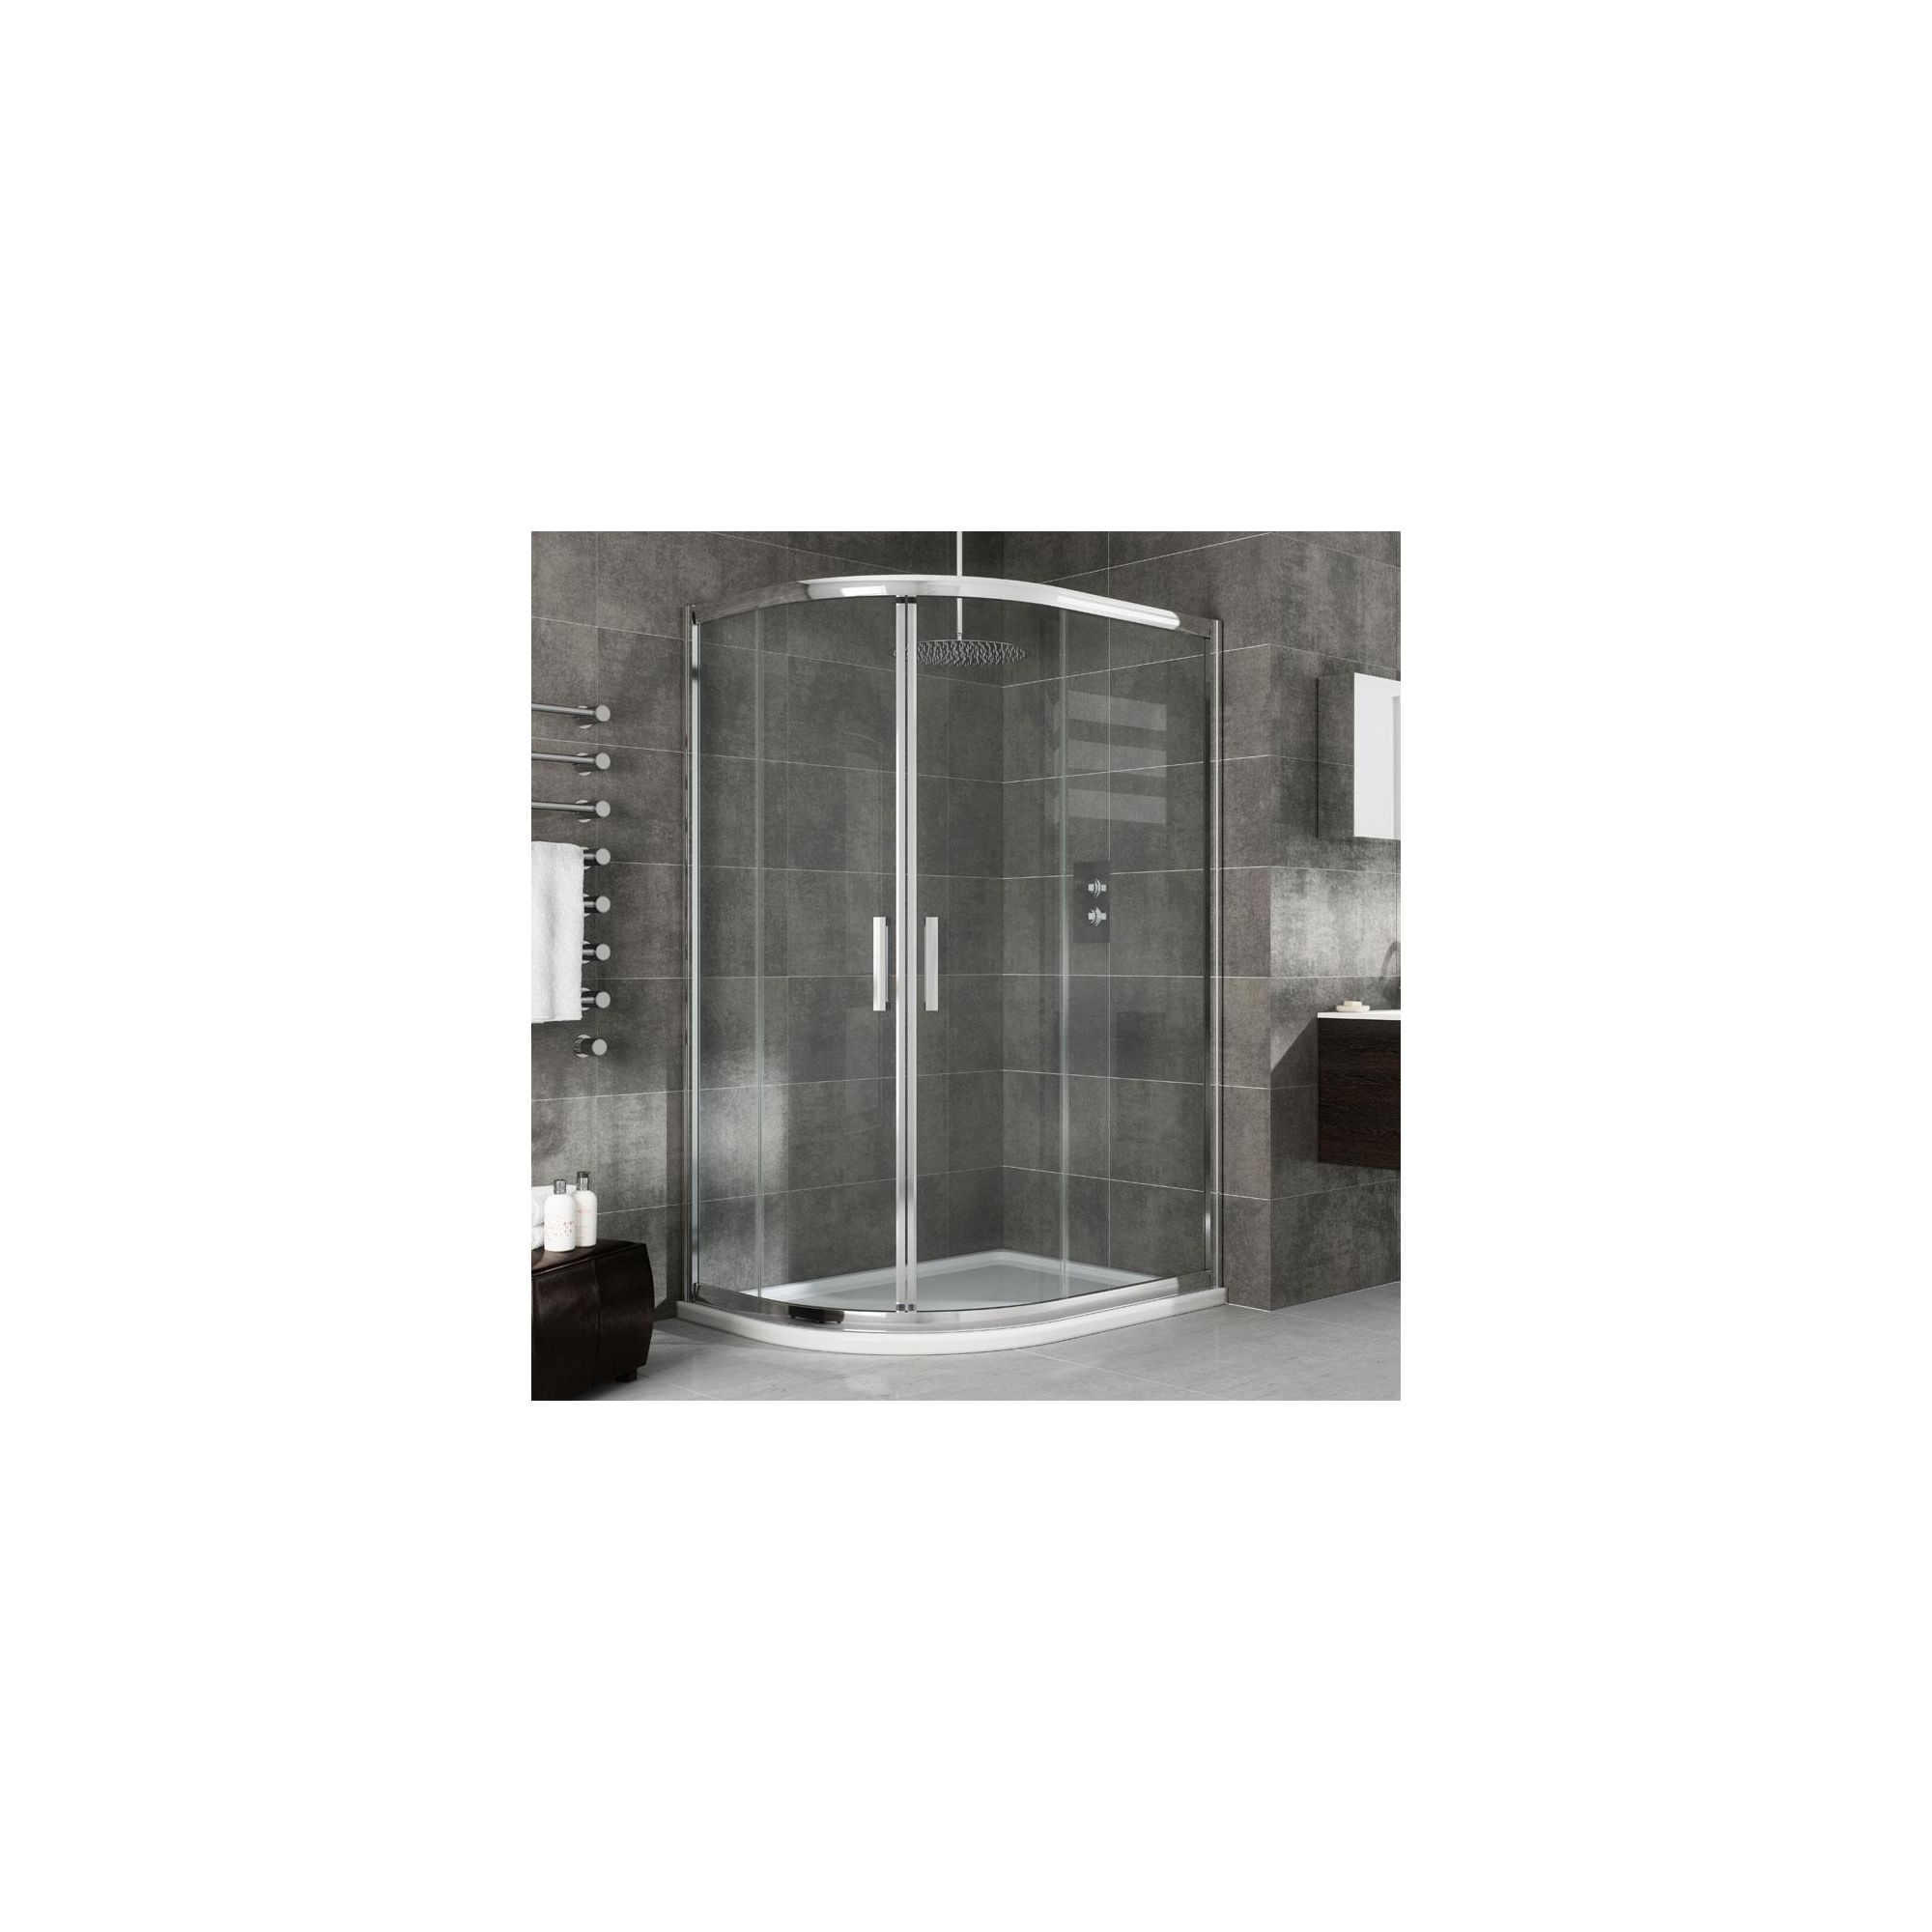 Elemis Eternity Offset Quadrant Shower Enclosure, 1200mm x 900mm, 8mm Glass, Low Profile Tray, Right Handed at Tesco Direct